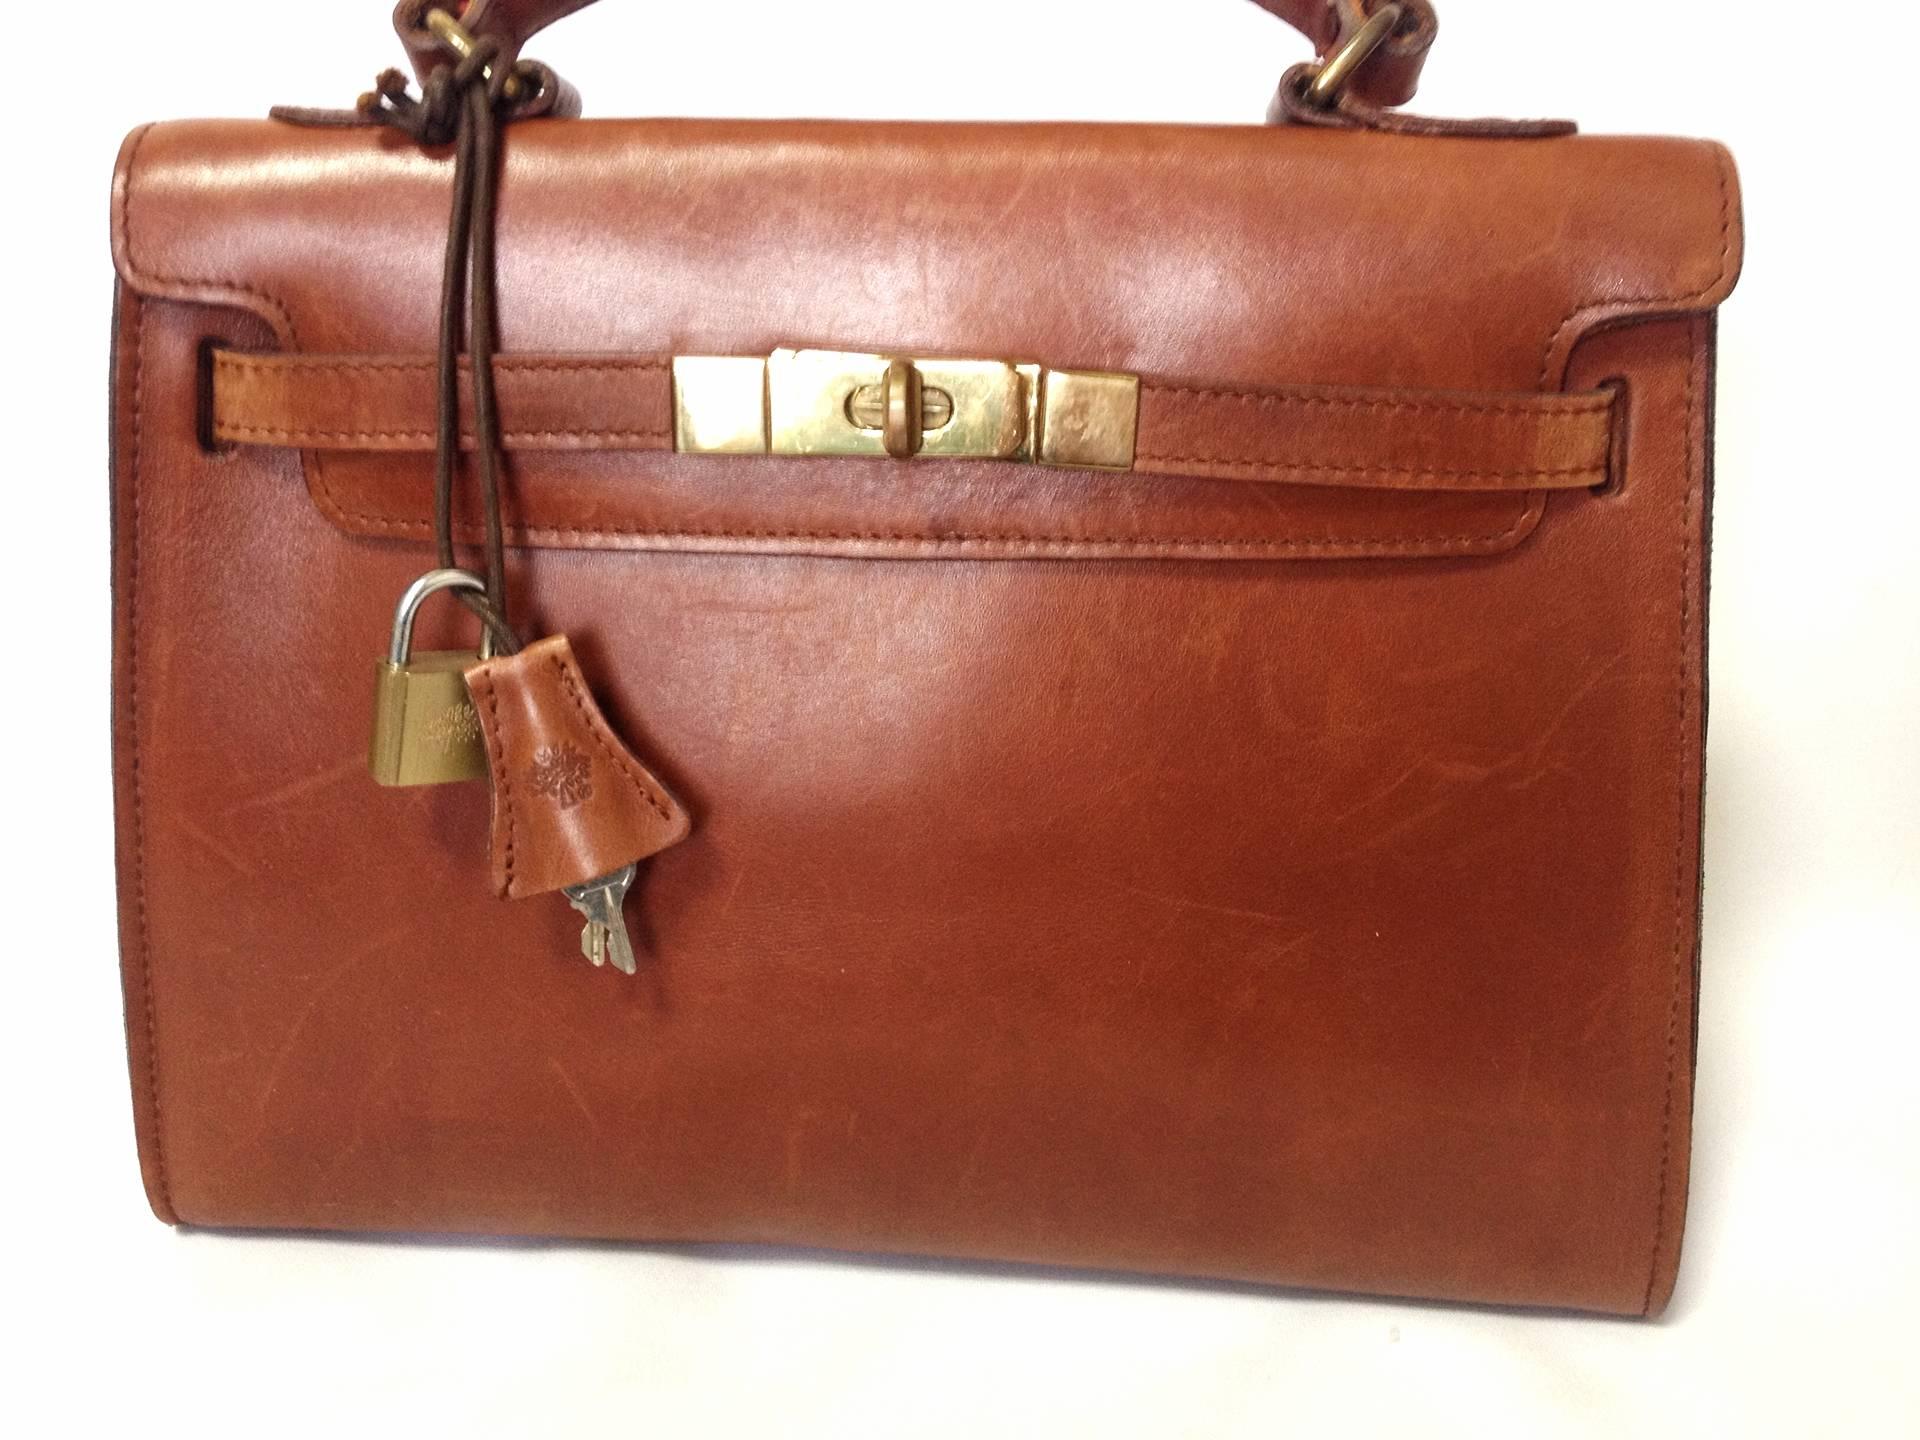 Vintage Mulberry smooth brown leather Kelly bag with keys and padlock. Roger Saul era. Rare masterpiece you must get.

Introducing another old sophisticated masterpiece from Mulberry in the Roger Saul era in the early 90s.

It has its deep